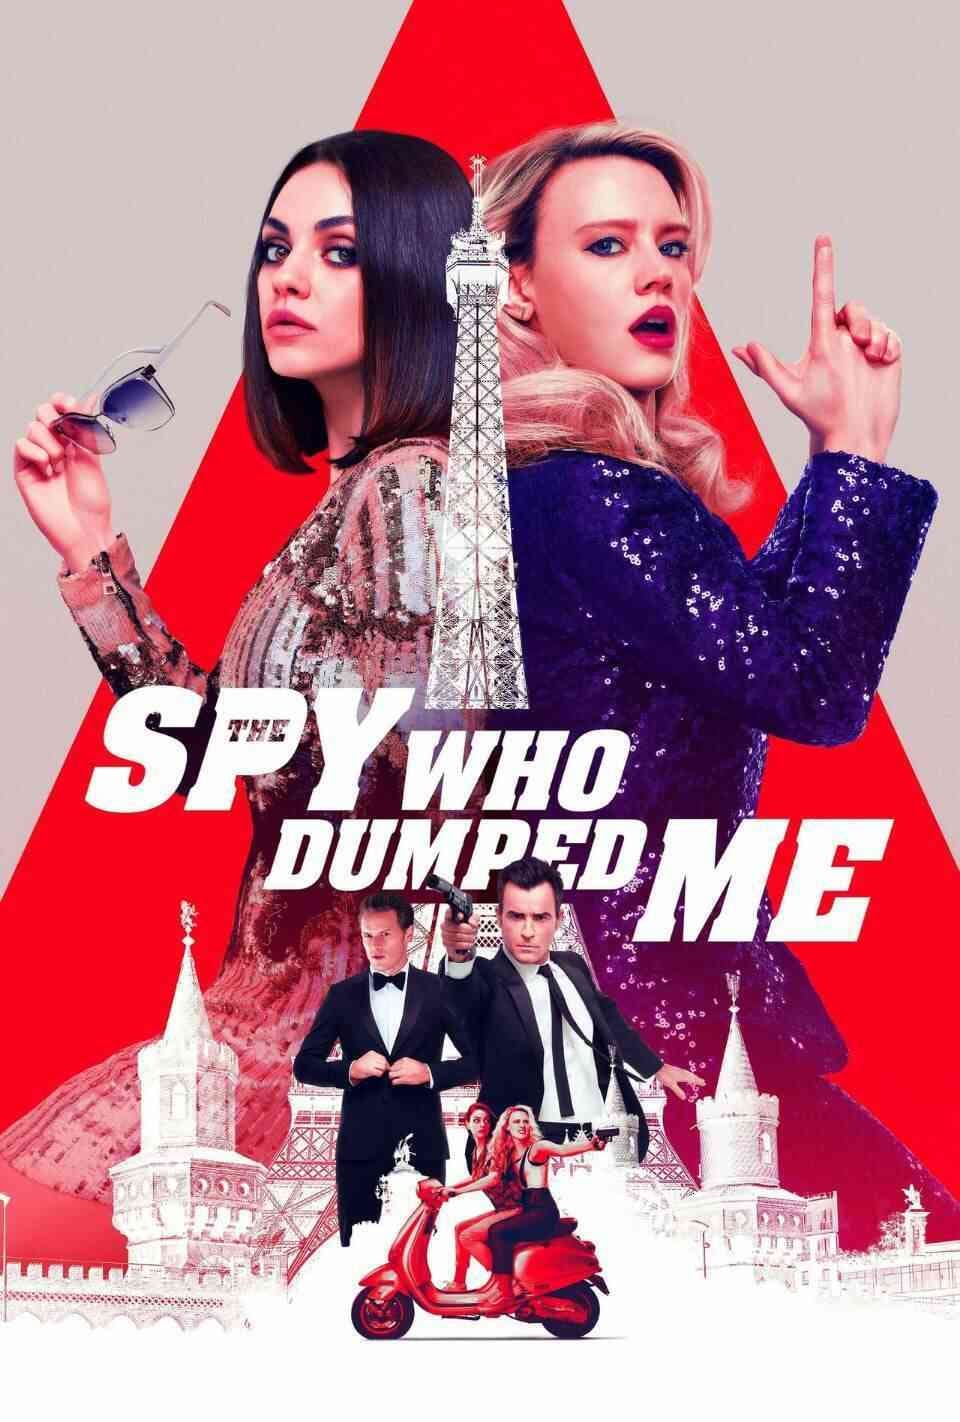 Read The Spy Who Dumped Me screenplay (poster)